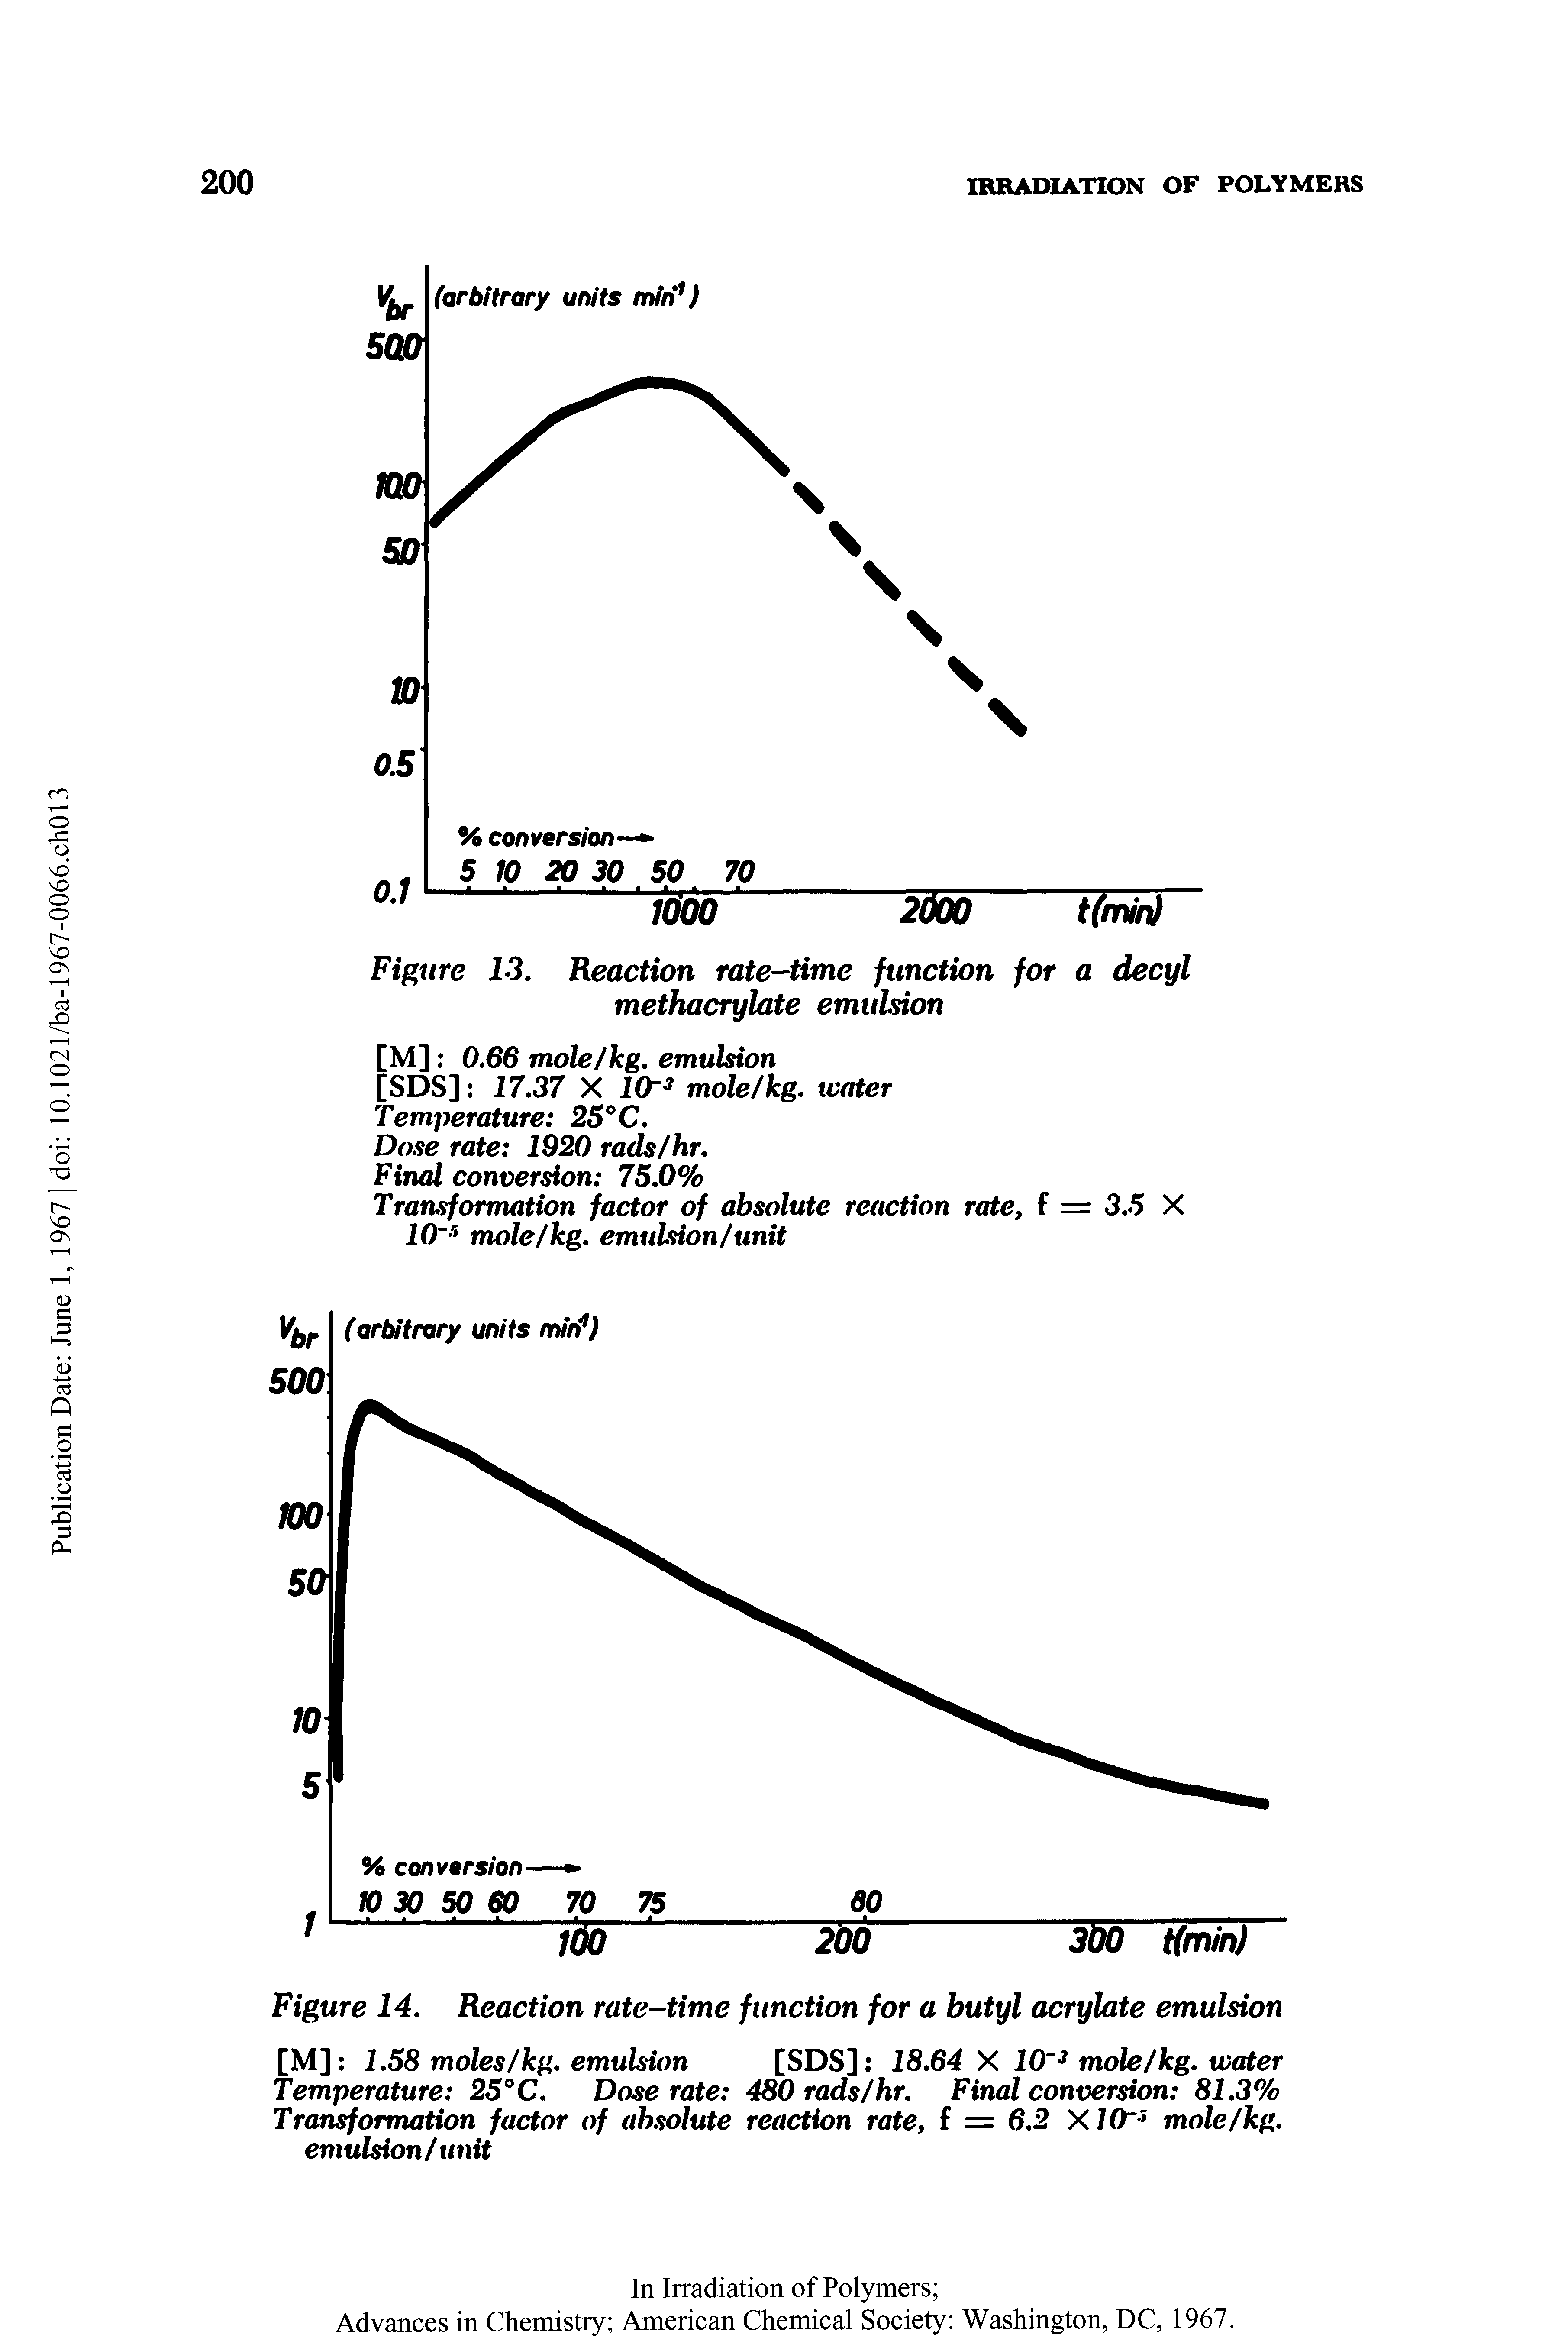 Figure 13. Reaction rate-time function for a decyl methacrylate emulsion...